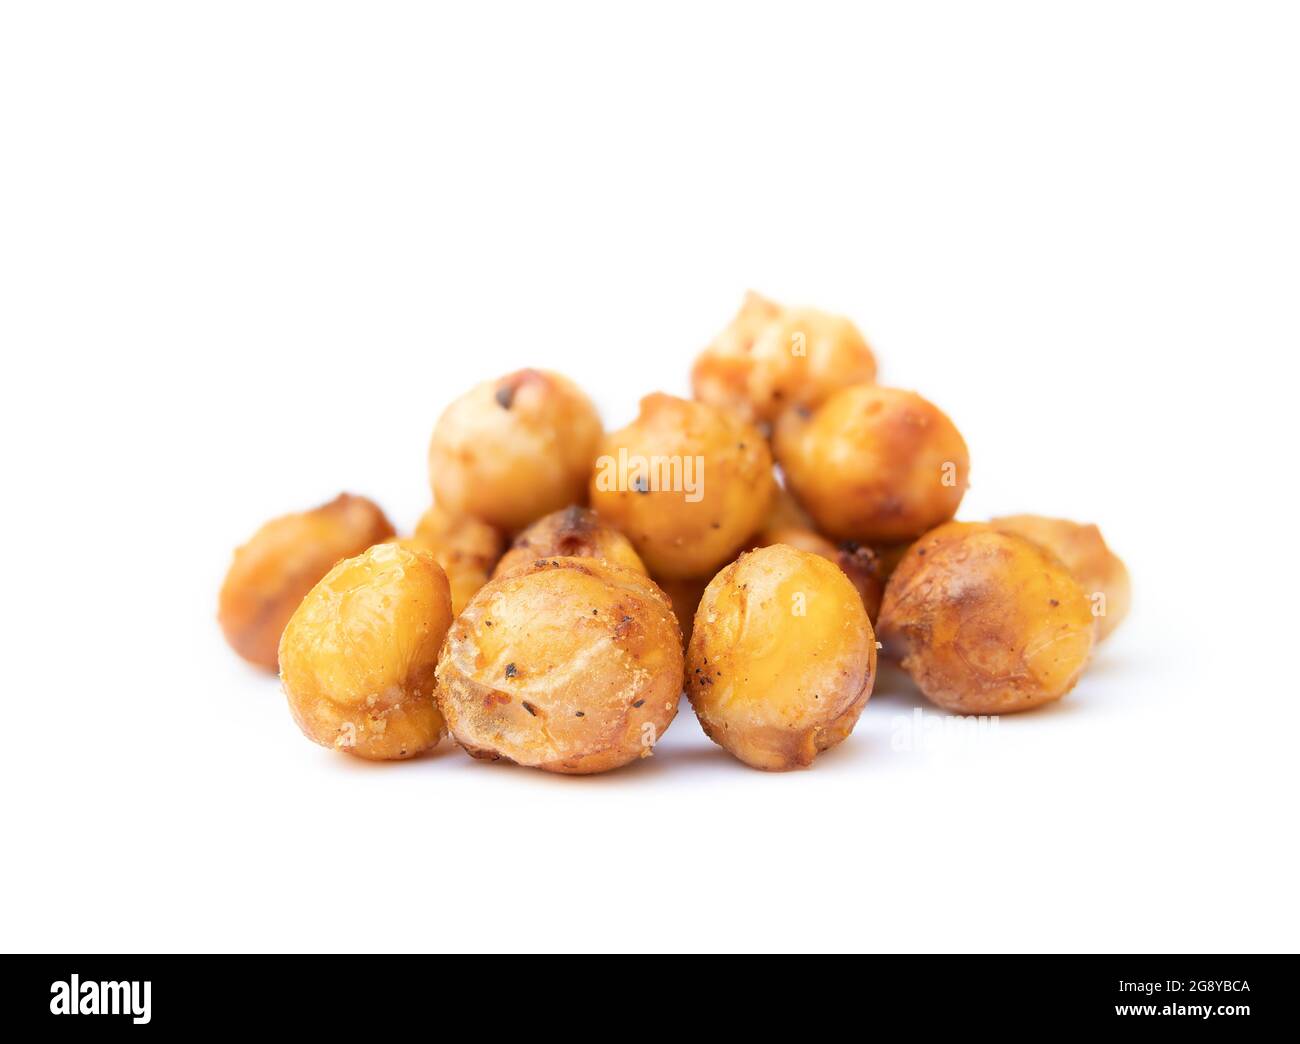 Air fried chickpeas or garbanzo beans with spices. Pile of yellow golden fried chickpeas. Easy homemade recipe for a crispy and healthy protein snack. Stock Photo